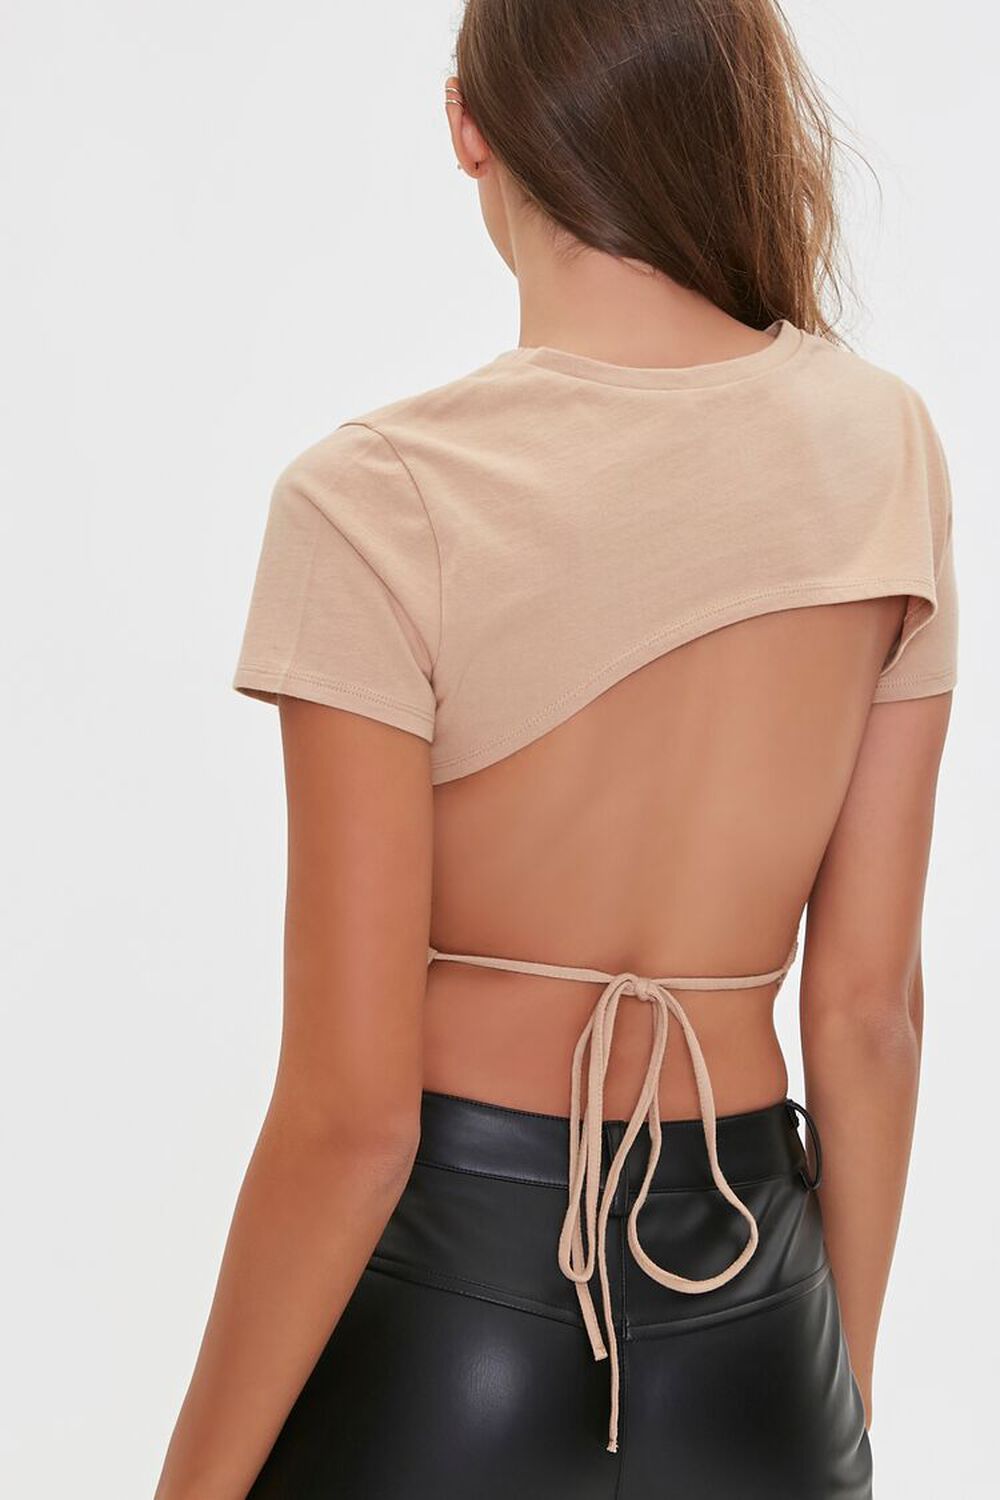 TAUPE Tie-Back Cropped Tee, image 1